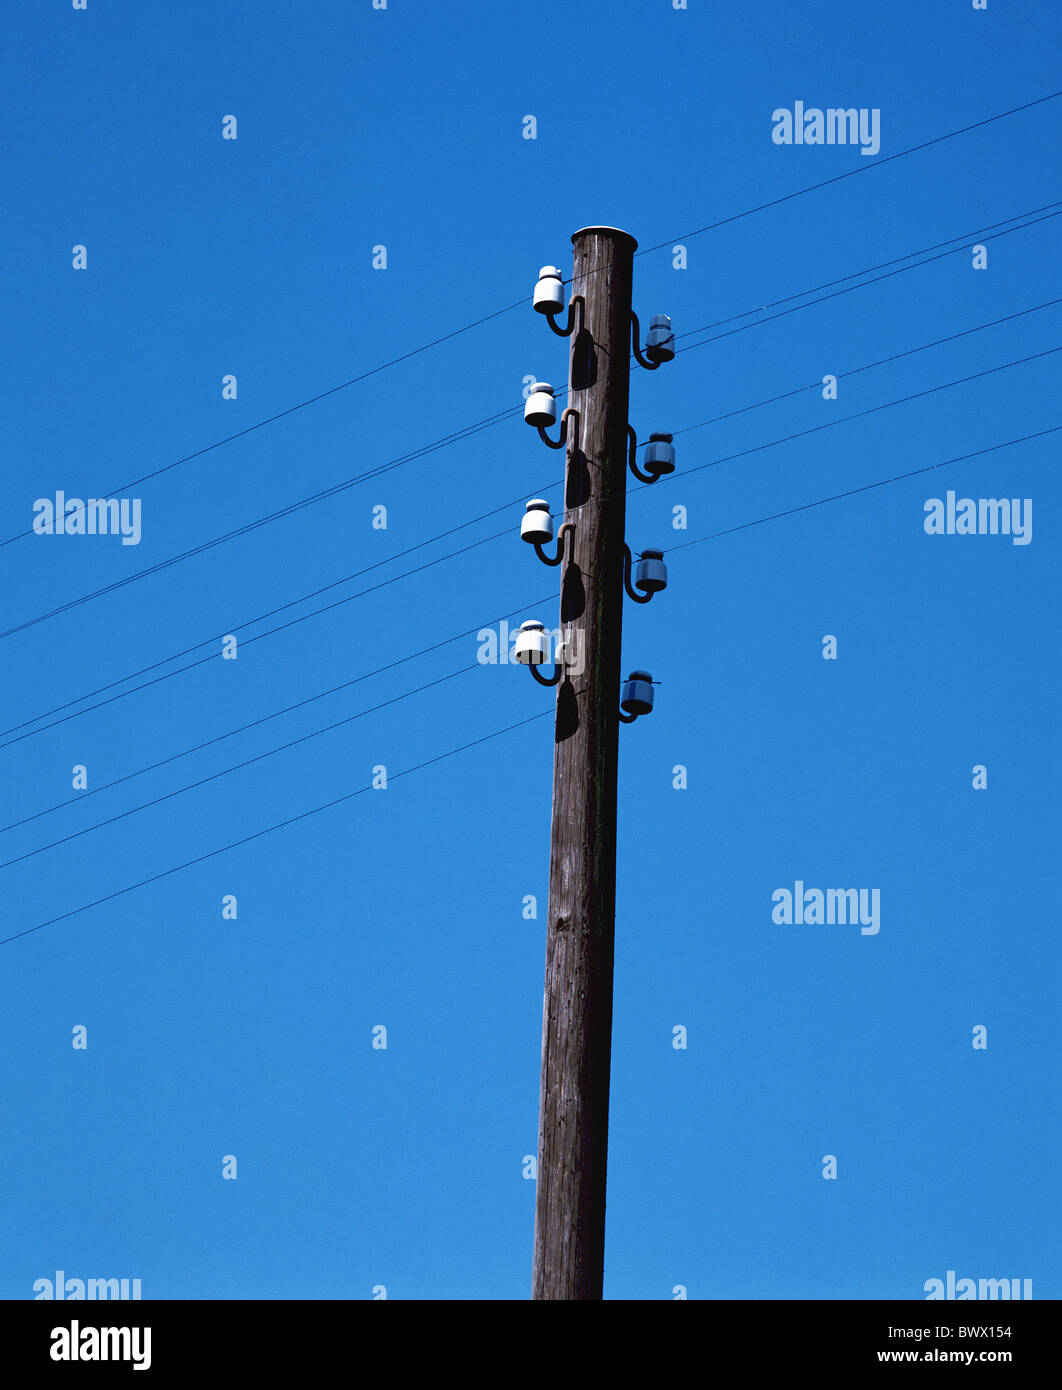 energy sky poles upper part section power supply lines wires stream current masts poles Stock Photo